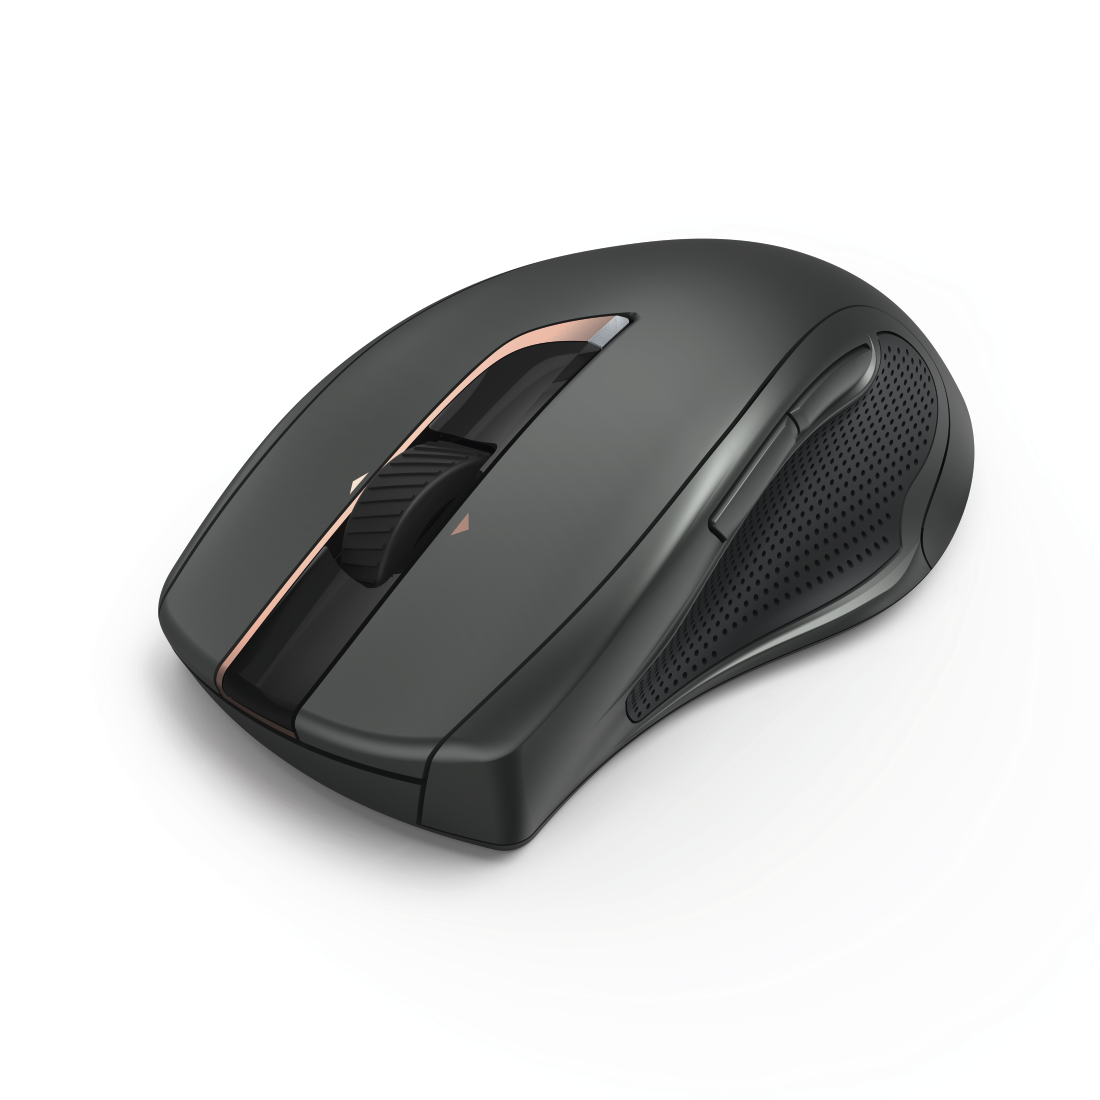 Hama MW-900 7-Button Laser Wireless Mouse